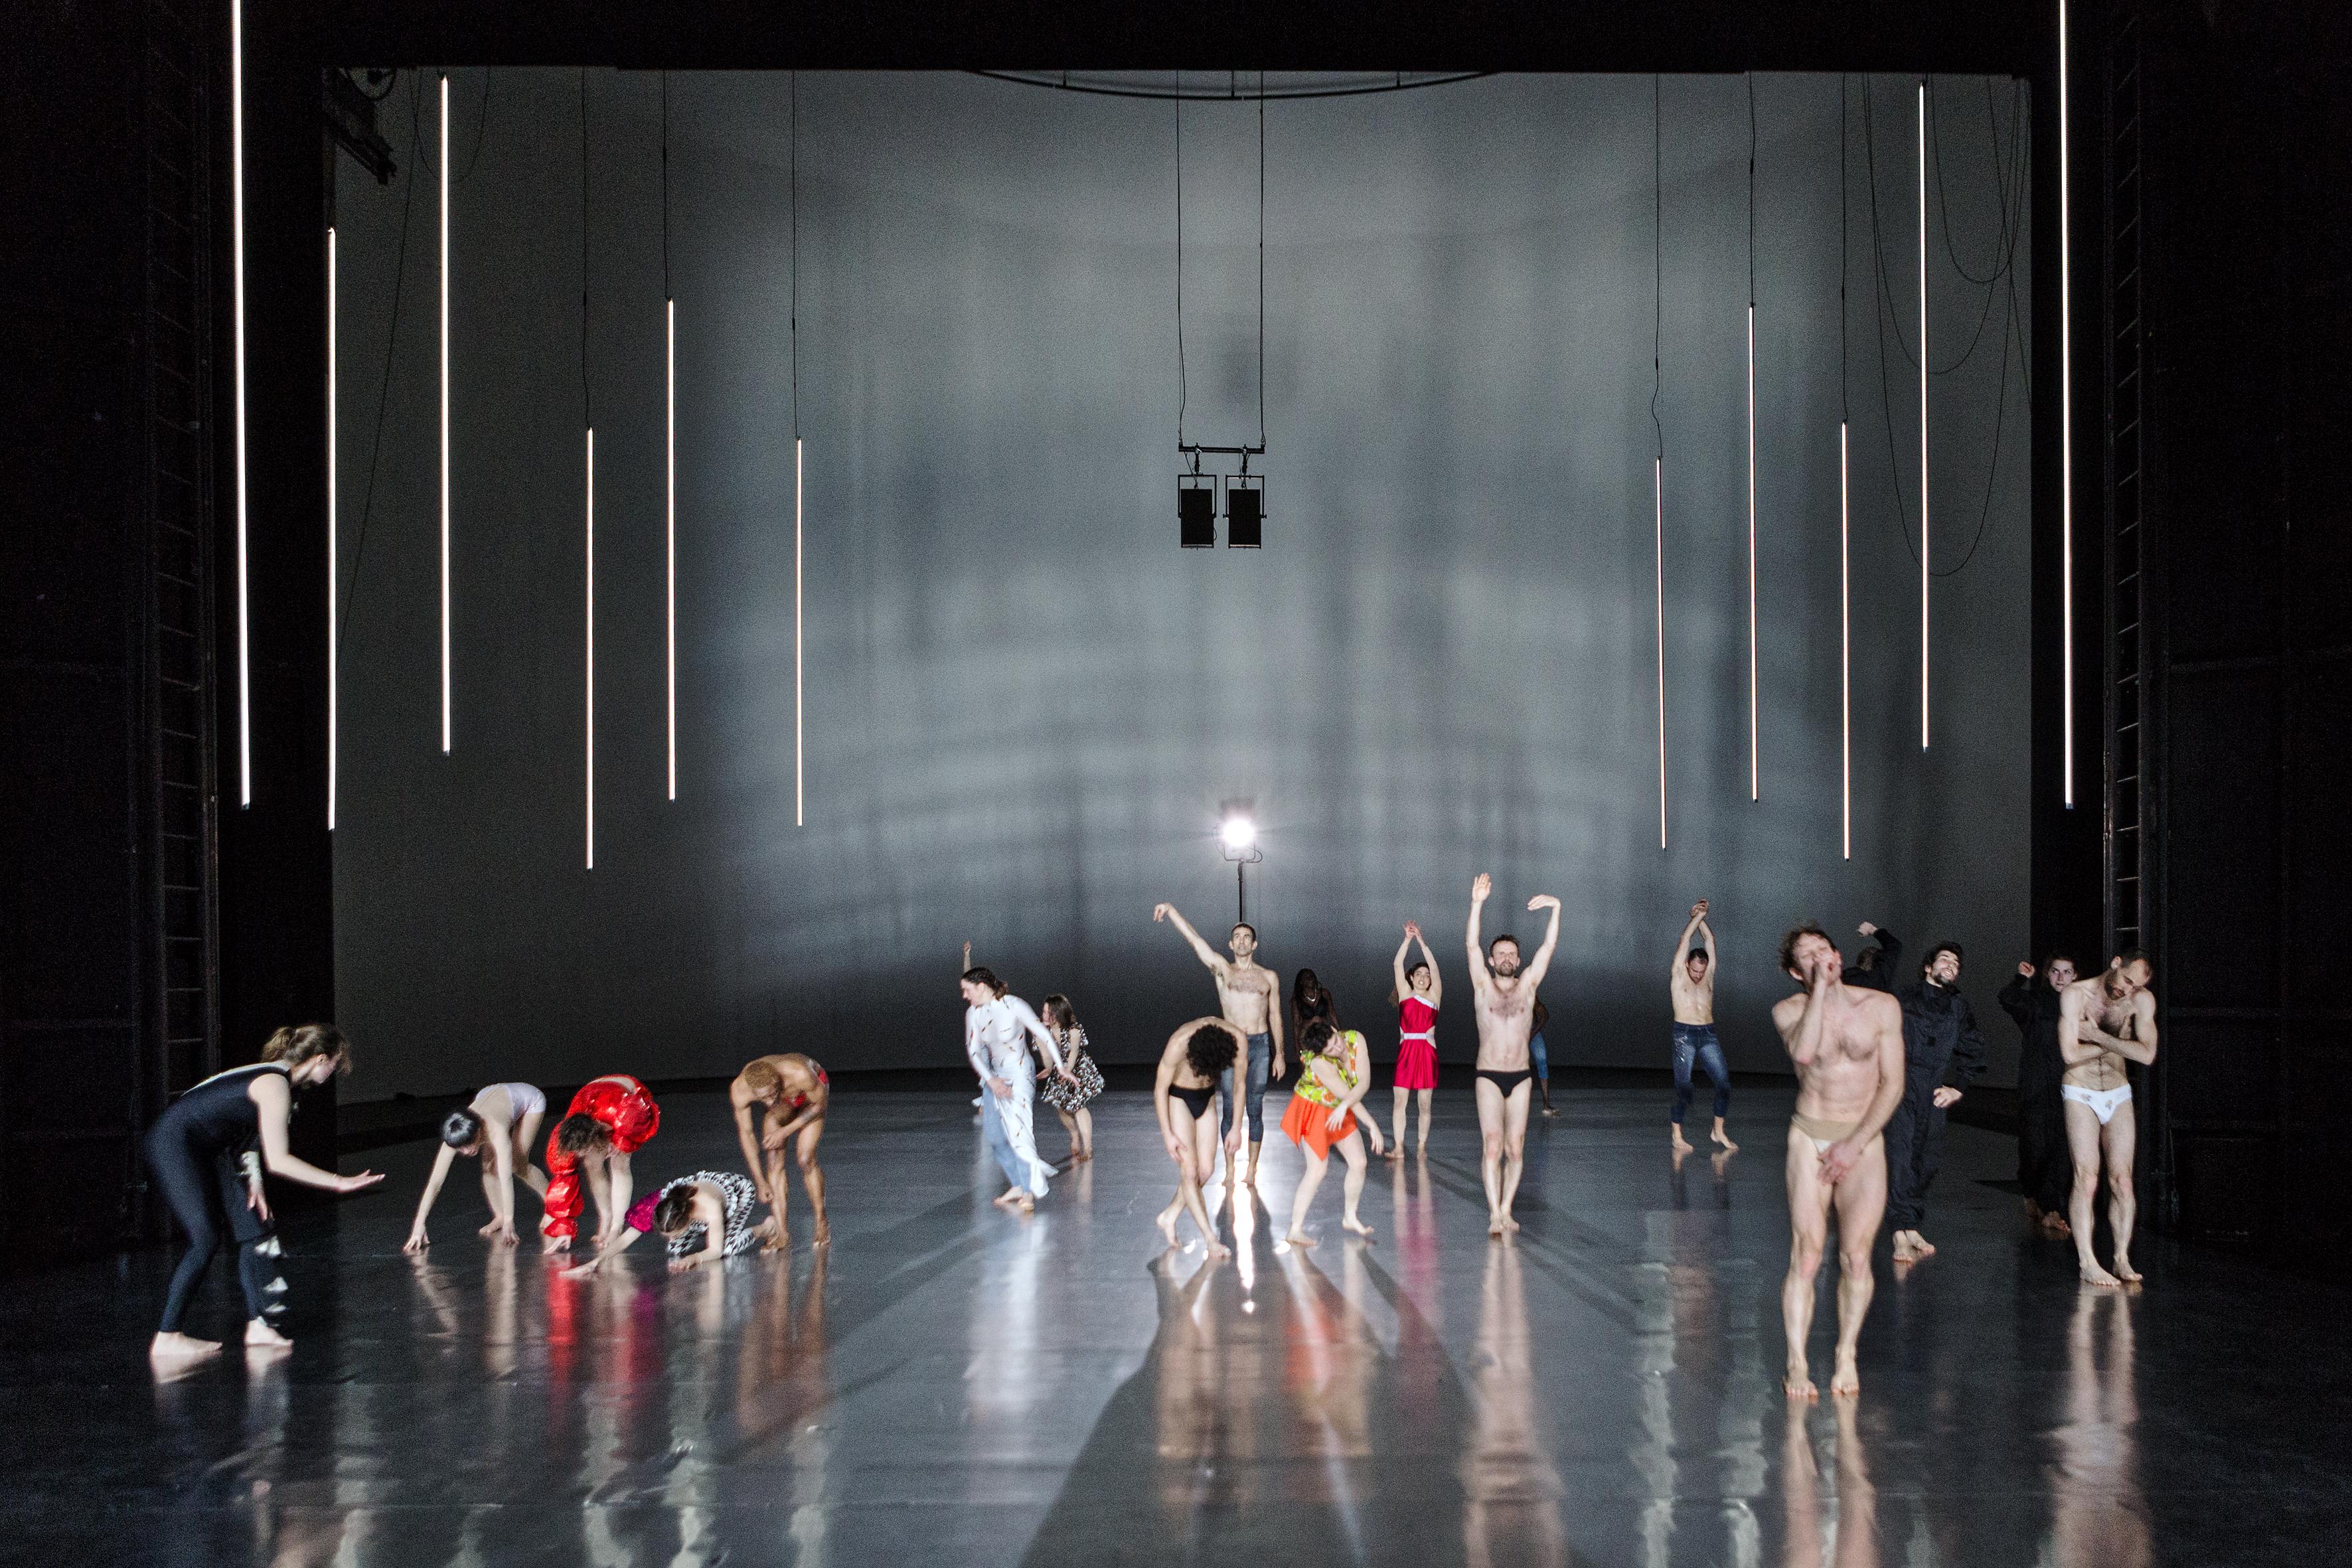 Dancers of 10000 gestures by Boris Charmatz on stage